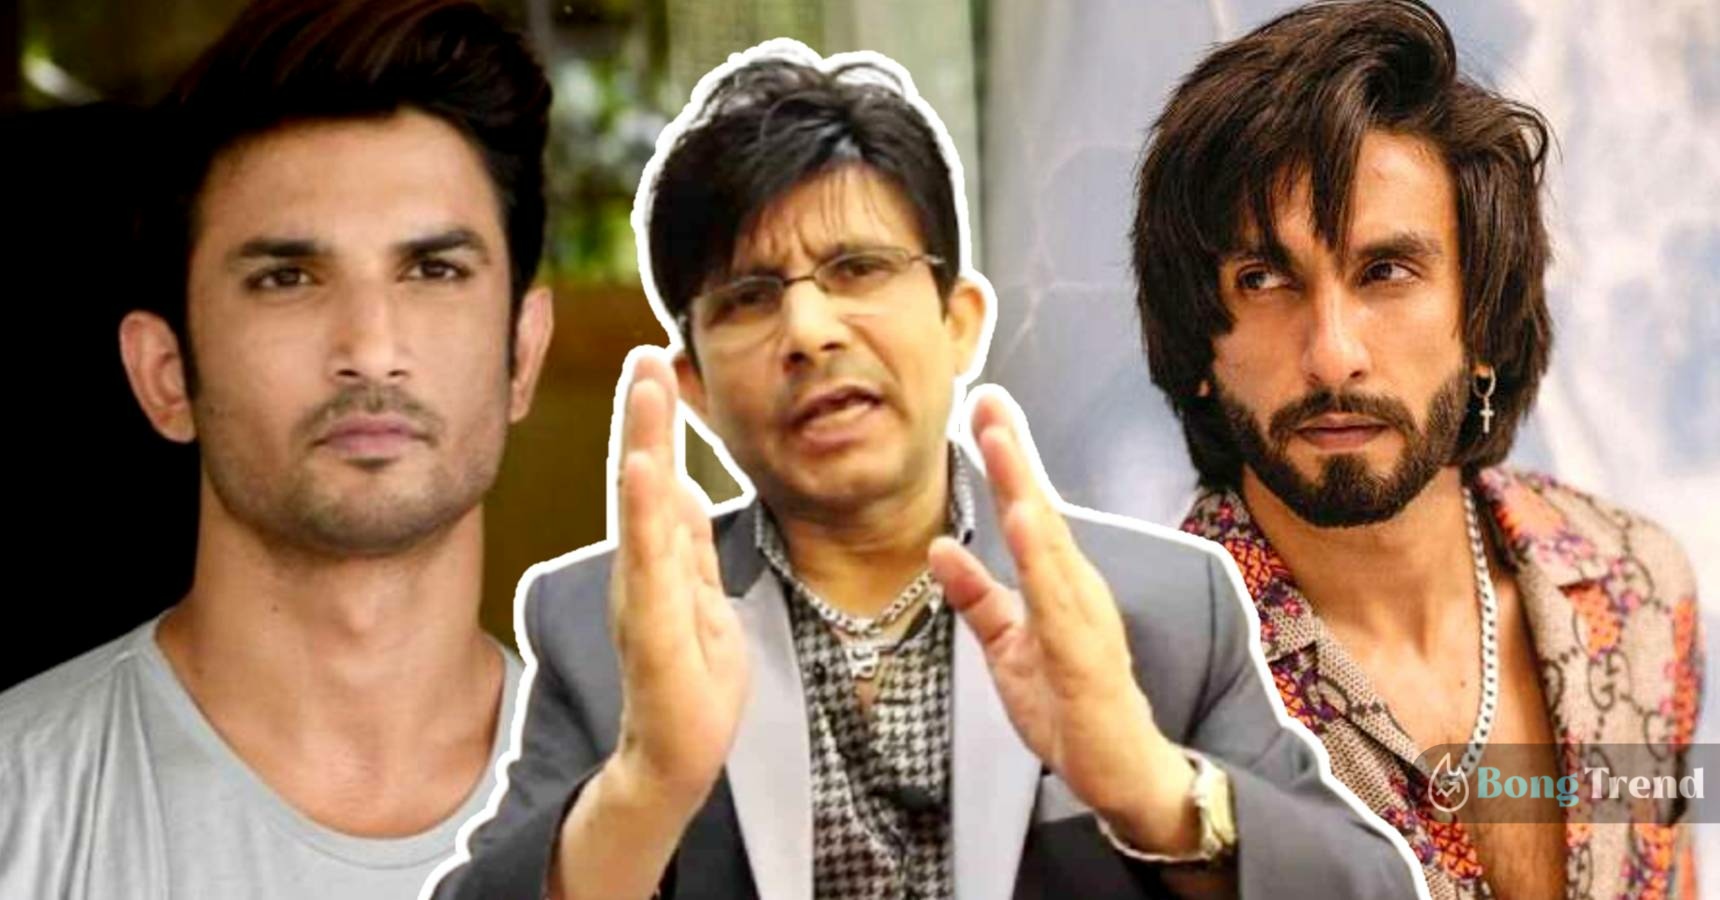 KRK says Ranveer Singh’s movies are becoming flop because he stole Sushant Singh Rajput’s opportunities